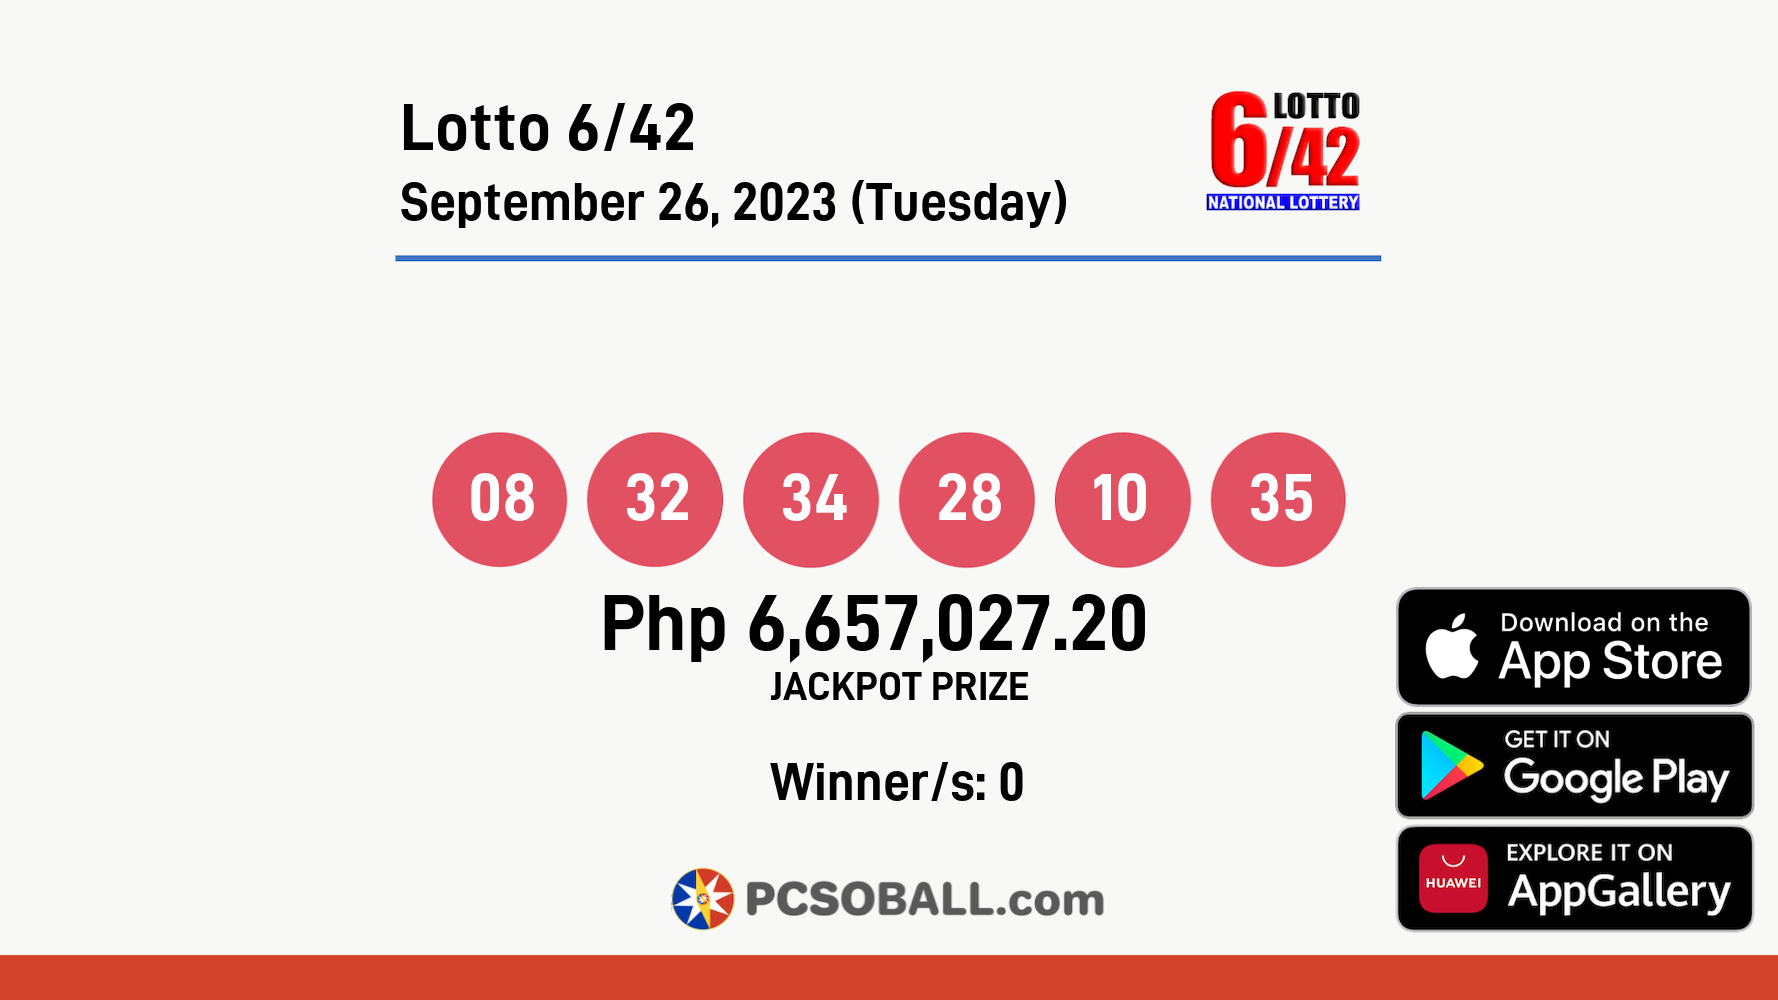 Lotto 6/42 September 26, 2023 (Tuesday) Result